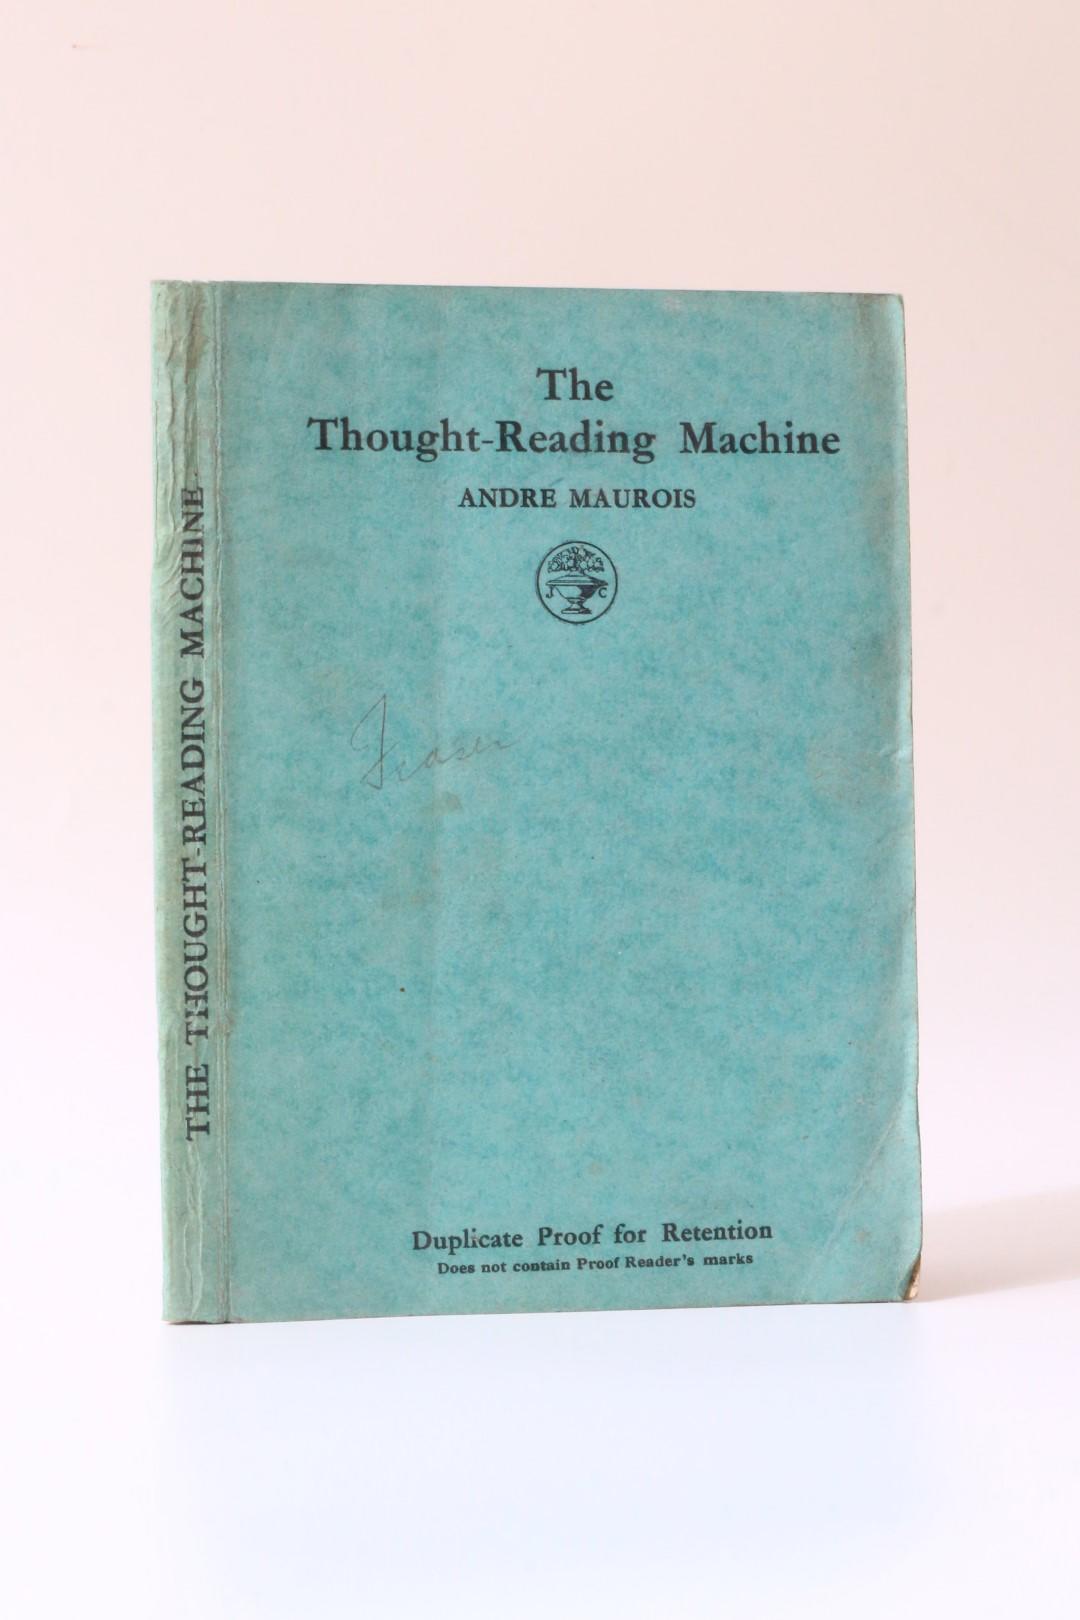 Andre Maurois - The Thought-Reading Machine - Jonathan Cape, 1938, Proof.